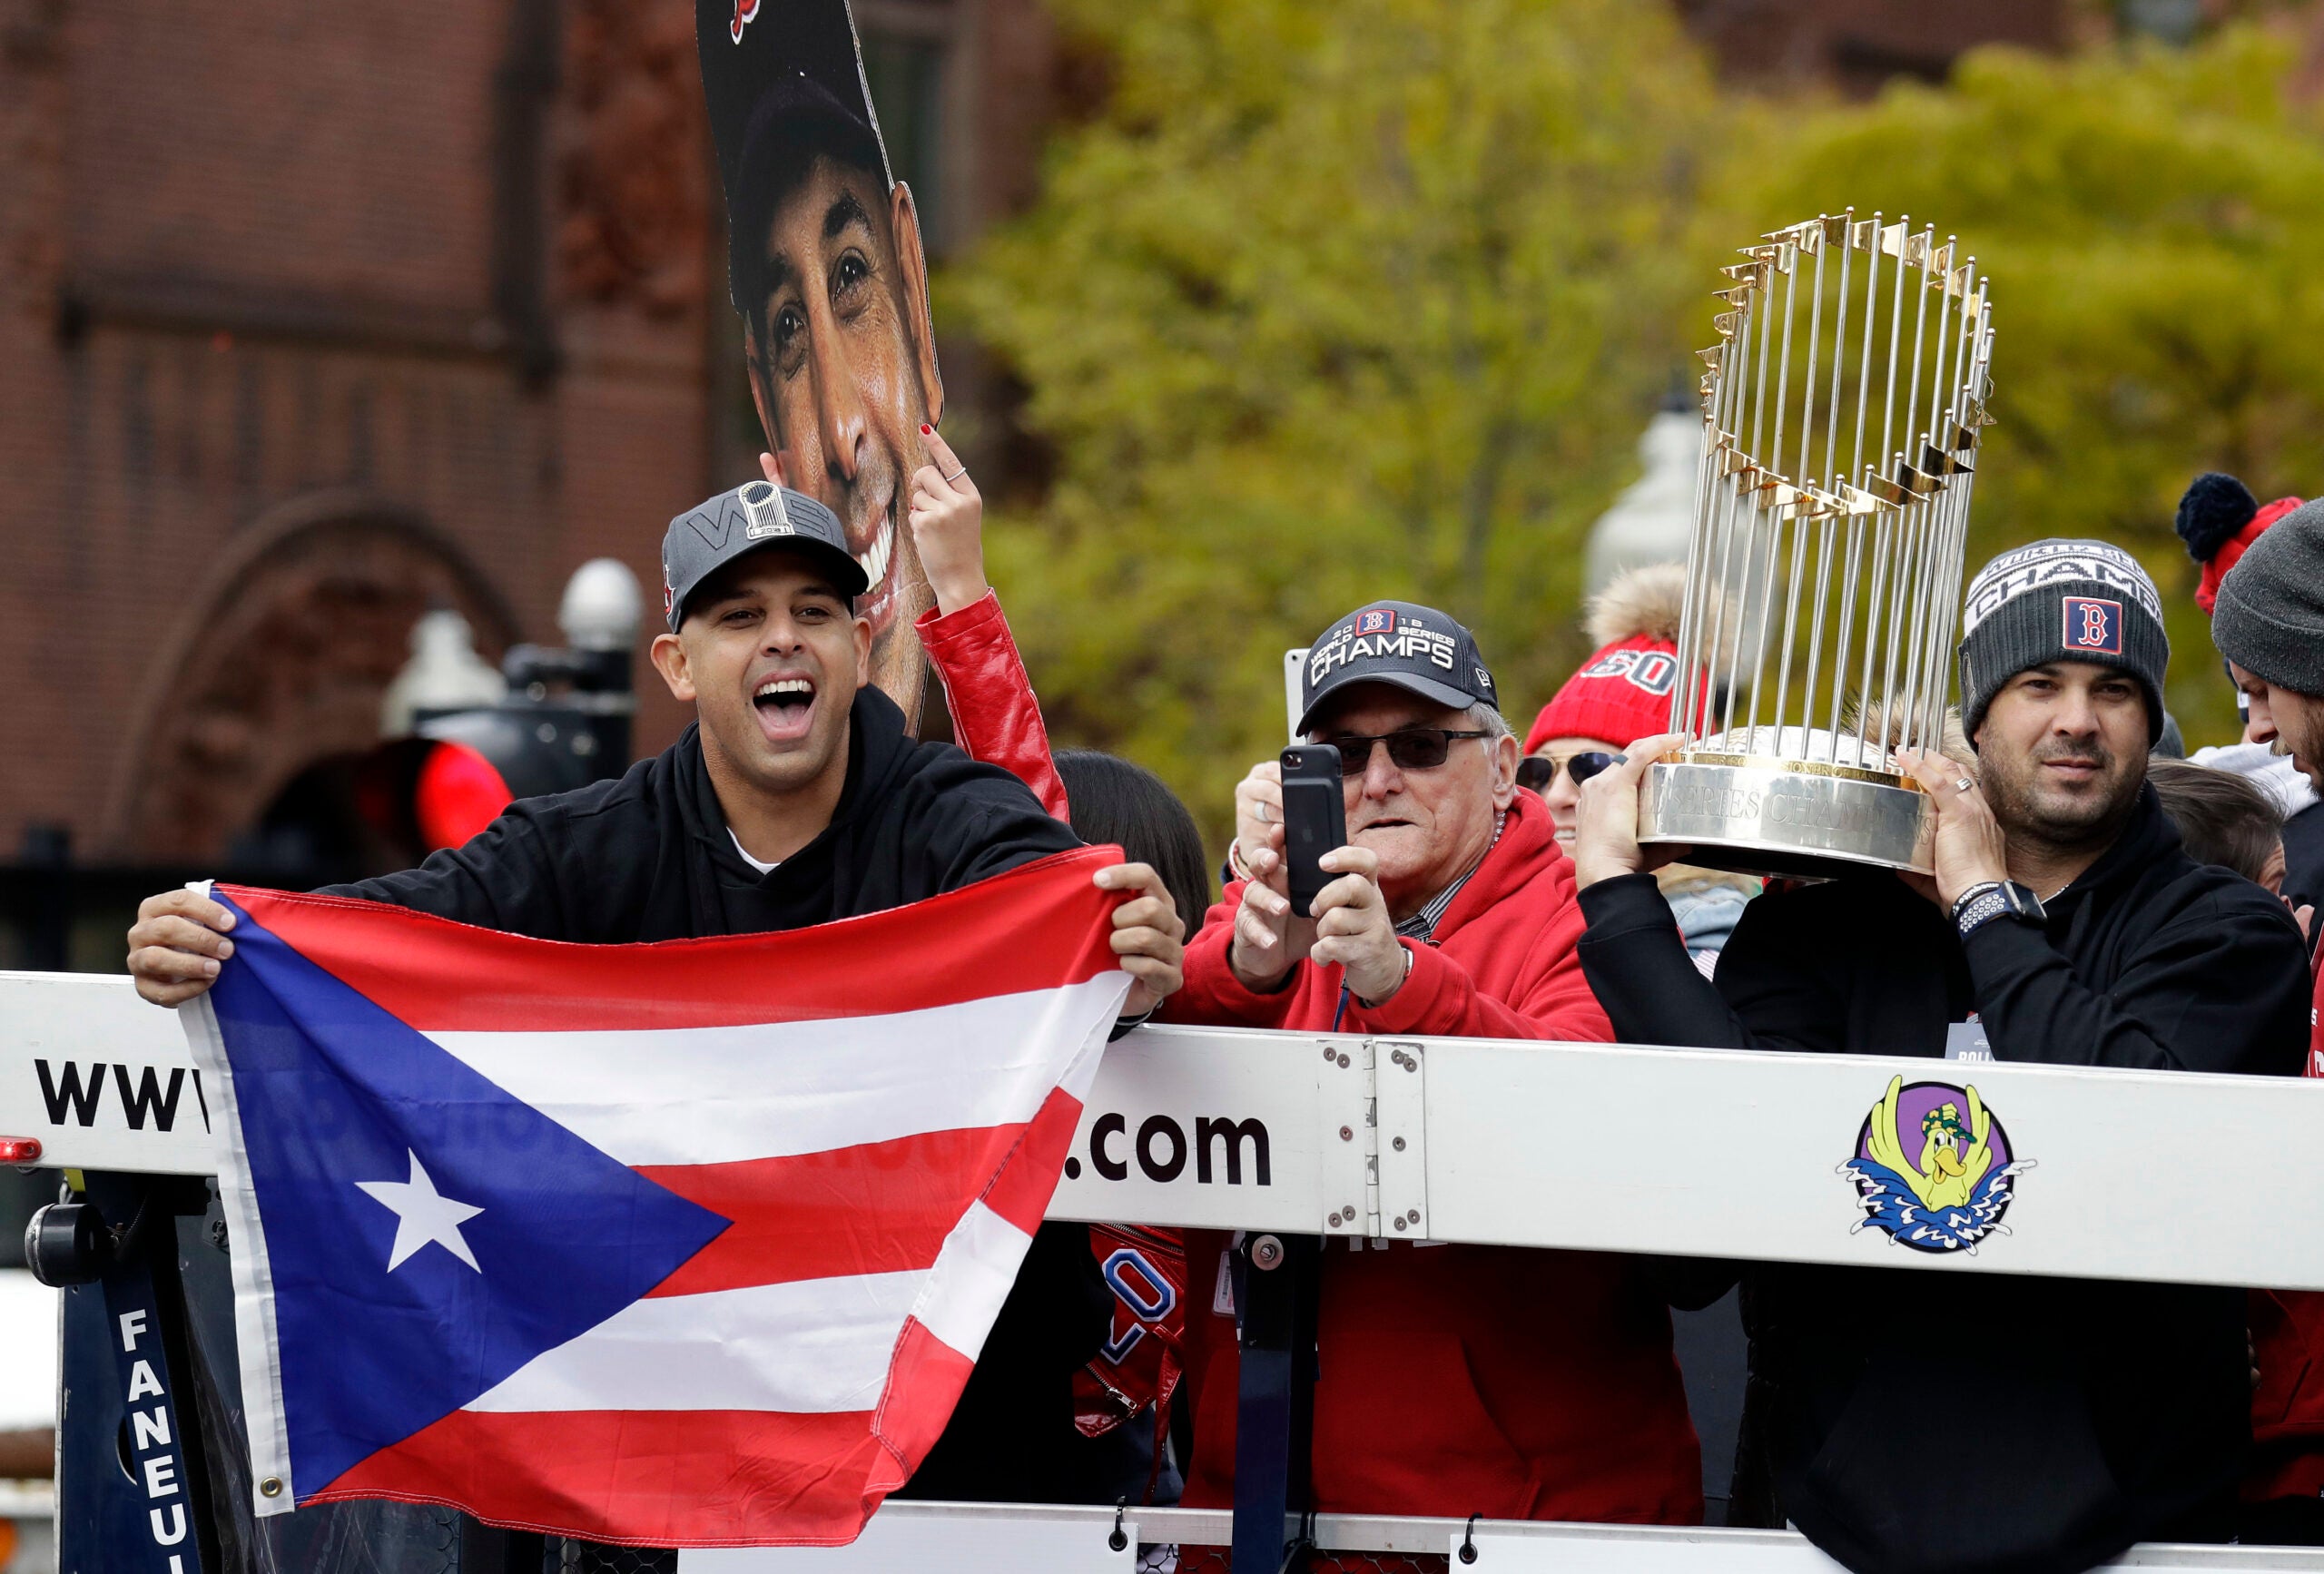 Alex Cora hopes to bring his team, trophy to Puerto Rico